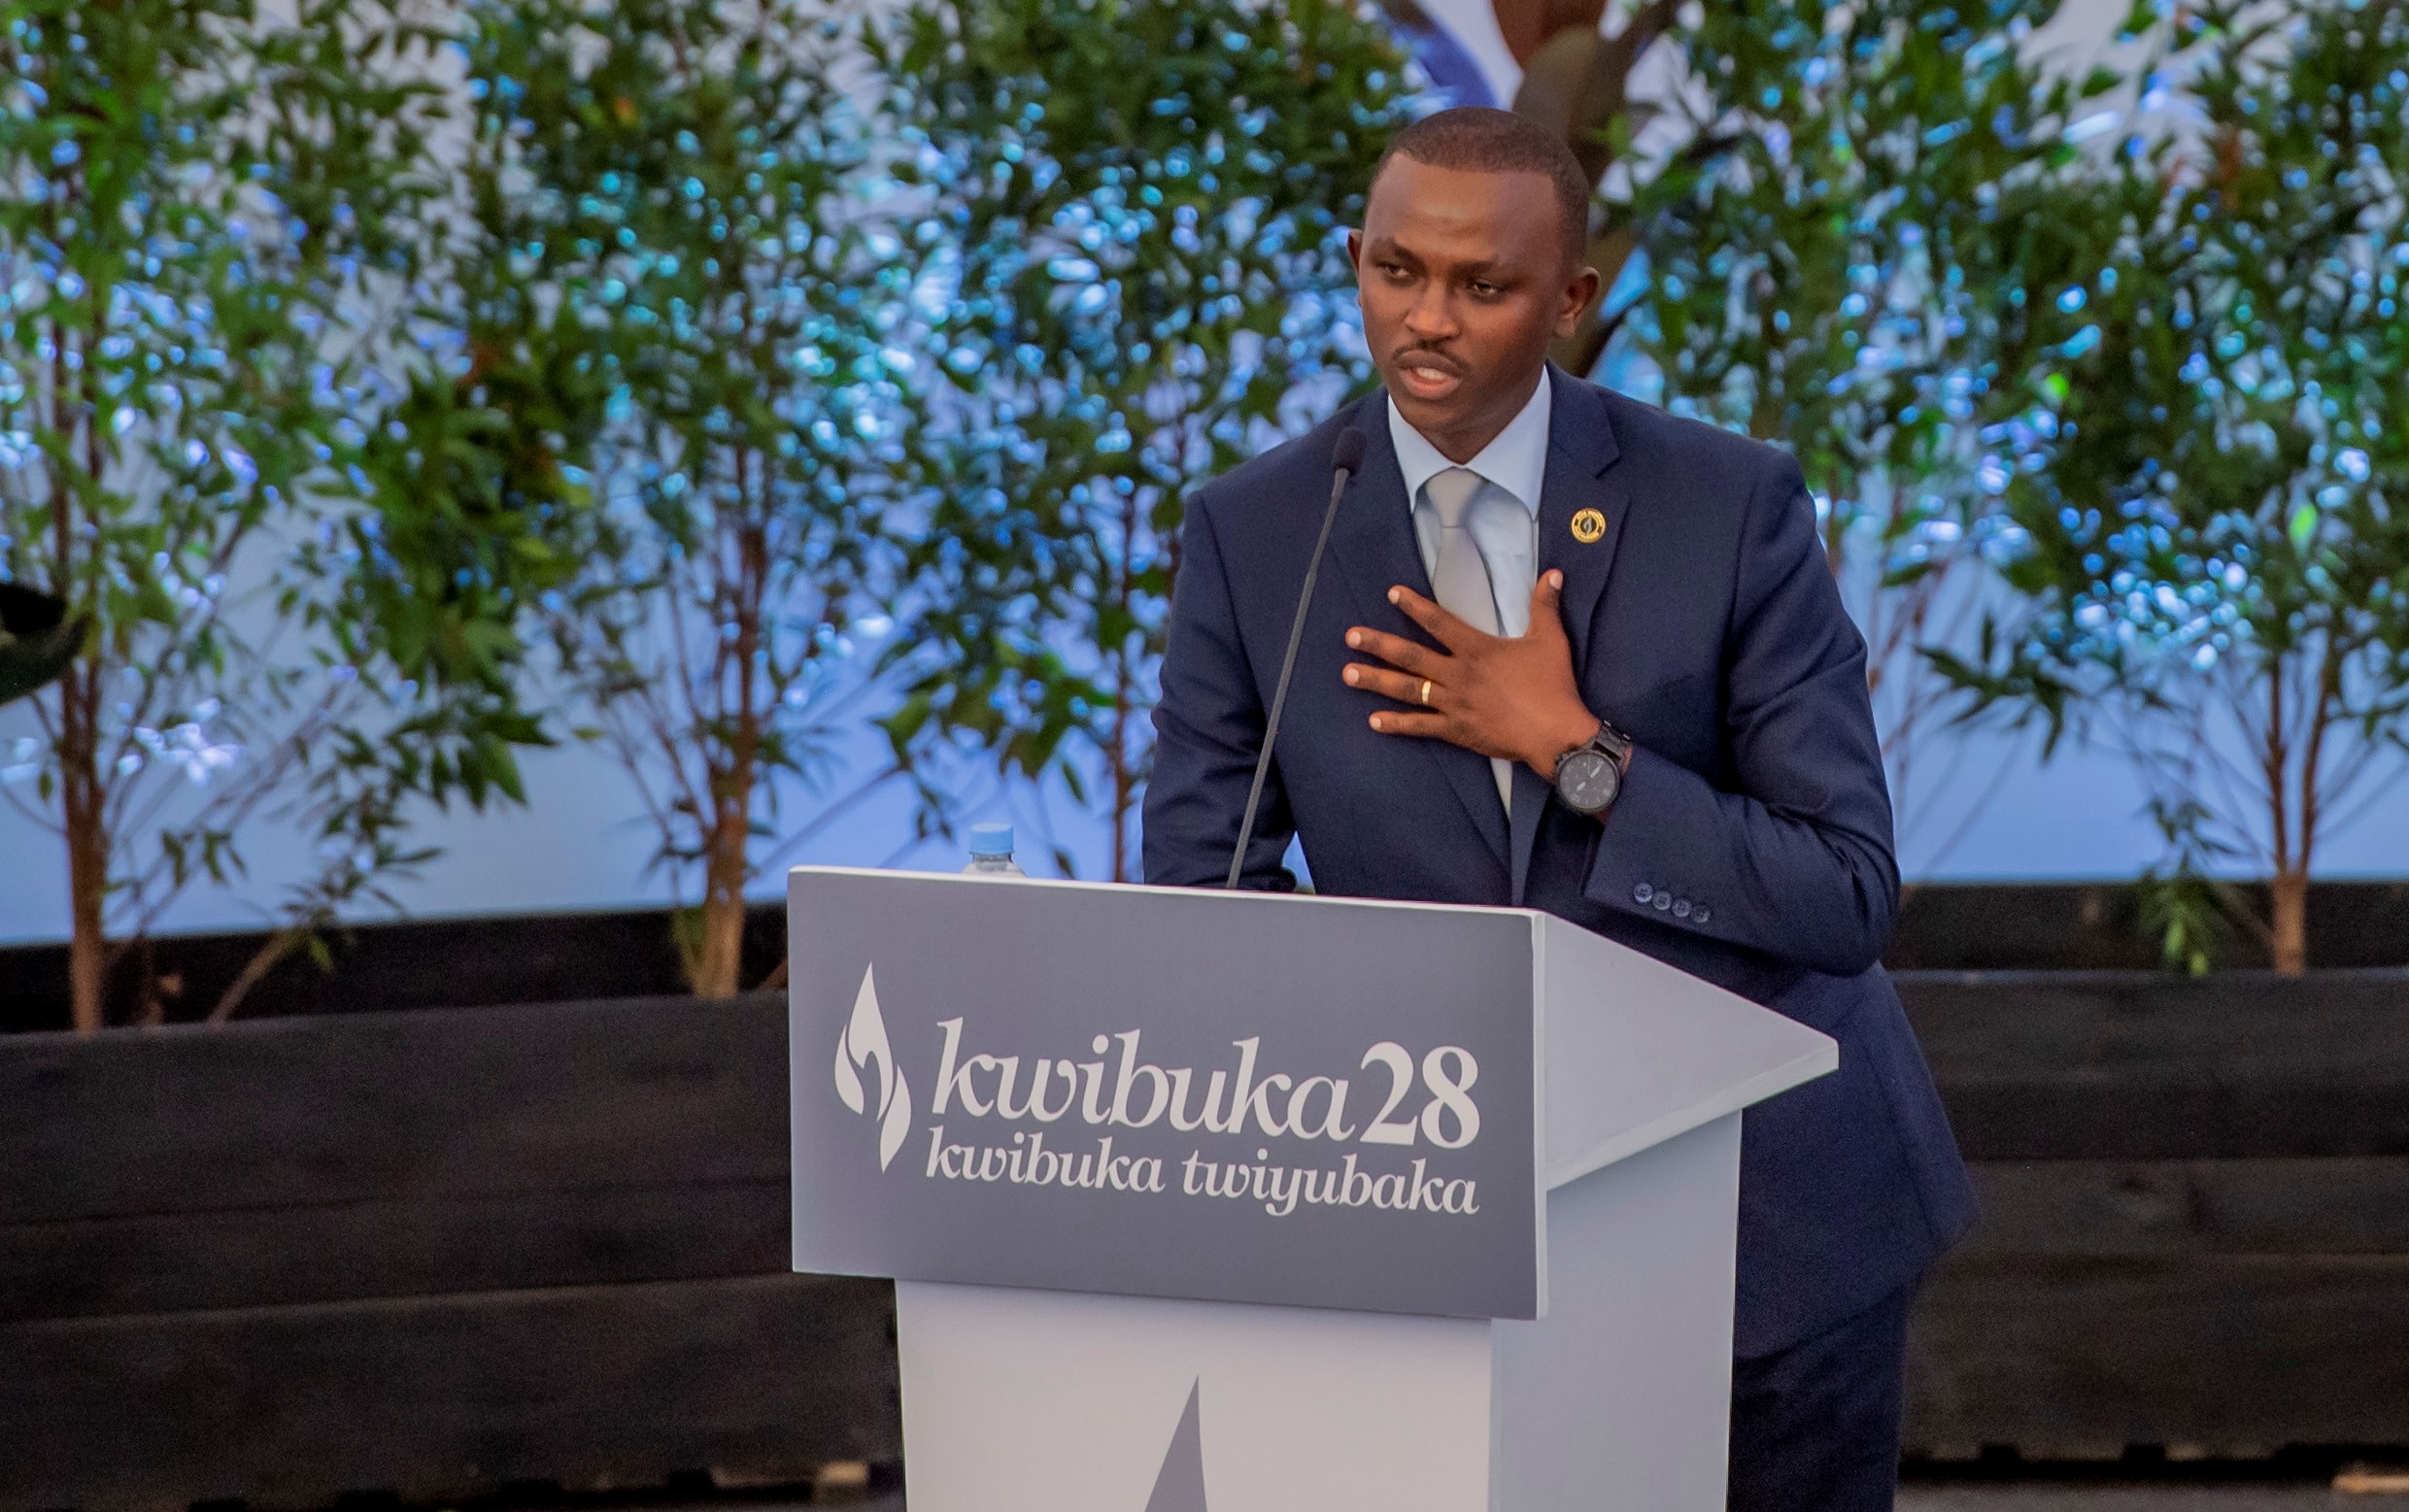 Jean-Nepo Sibomana , a genocide survivor, gives his testimony during the commemoration event at Kigali Genocide Memorial on April 7,2022. Sibomana who  lost all his immediate family members in the 1994 Genocide against the Tutsi.